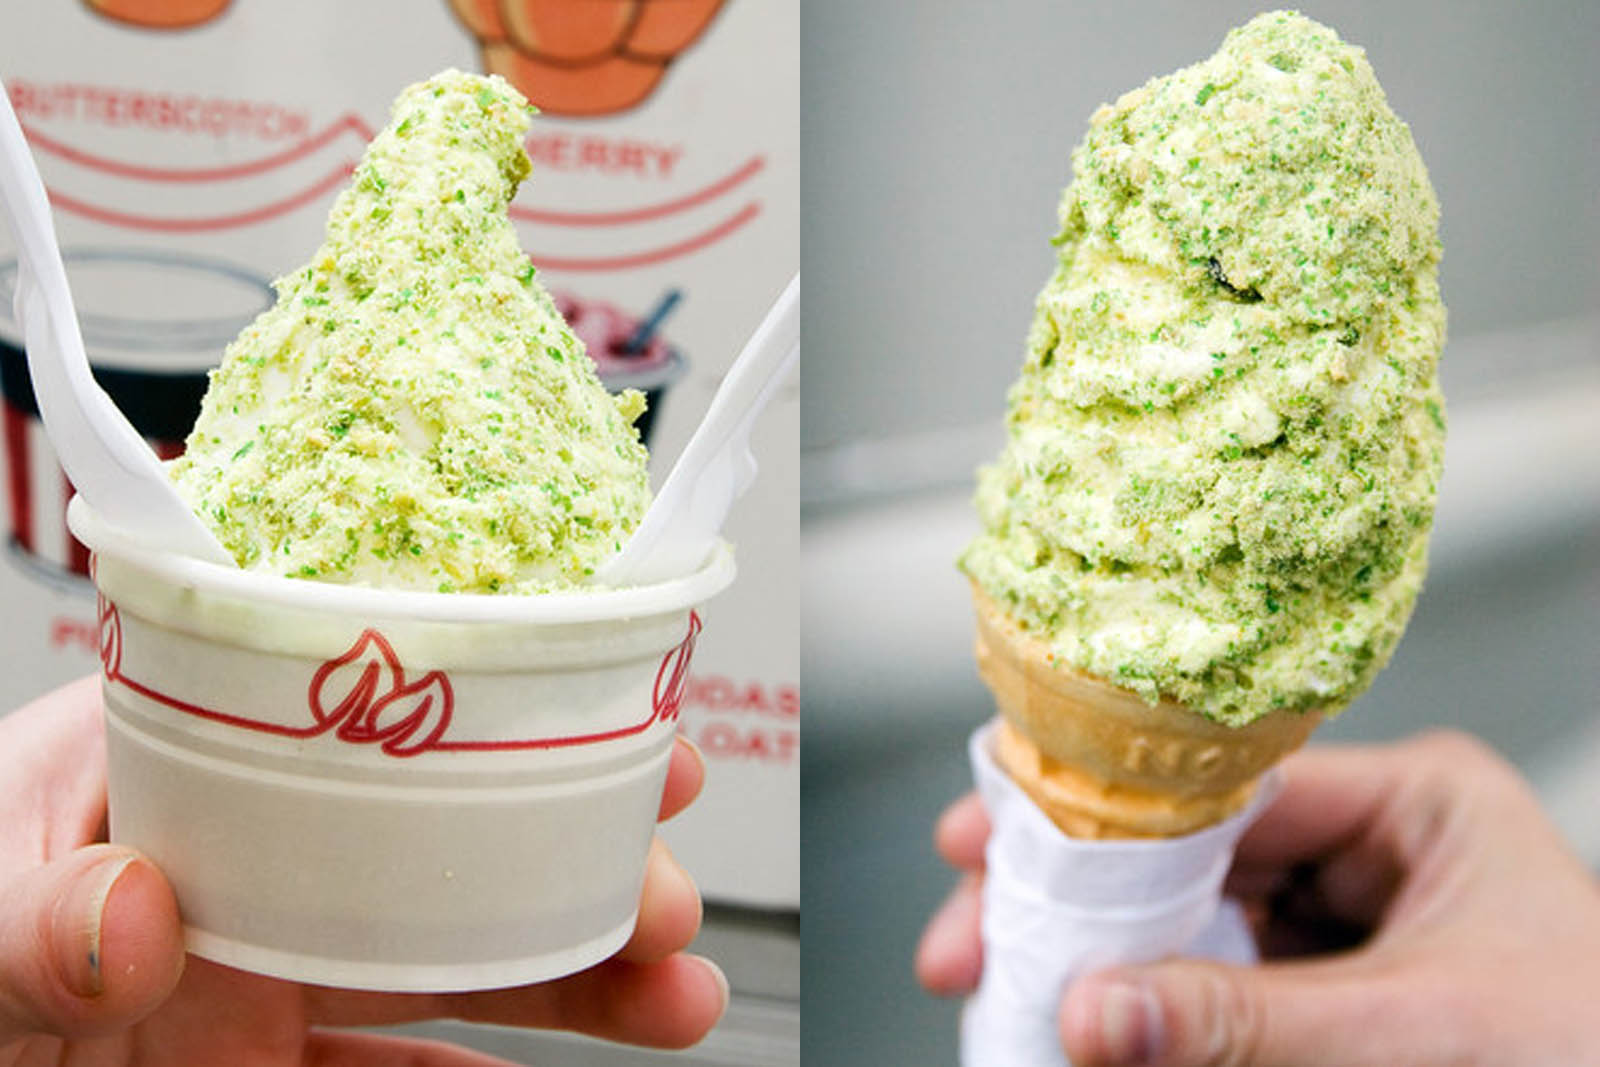 🍦 It’s Time to Vote “Yay” Or “Nay” On These Unusual Ice Cream Flavors 